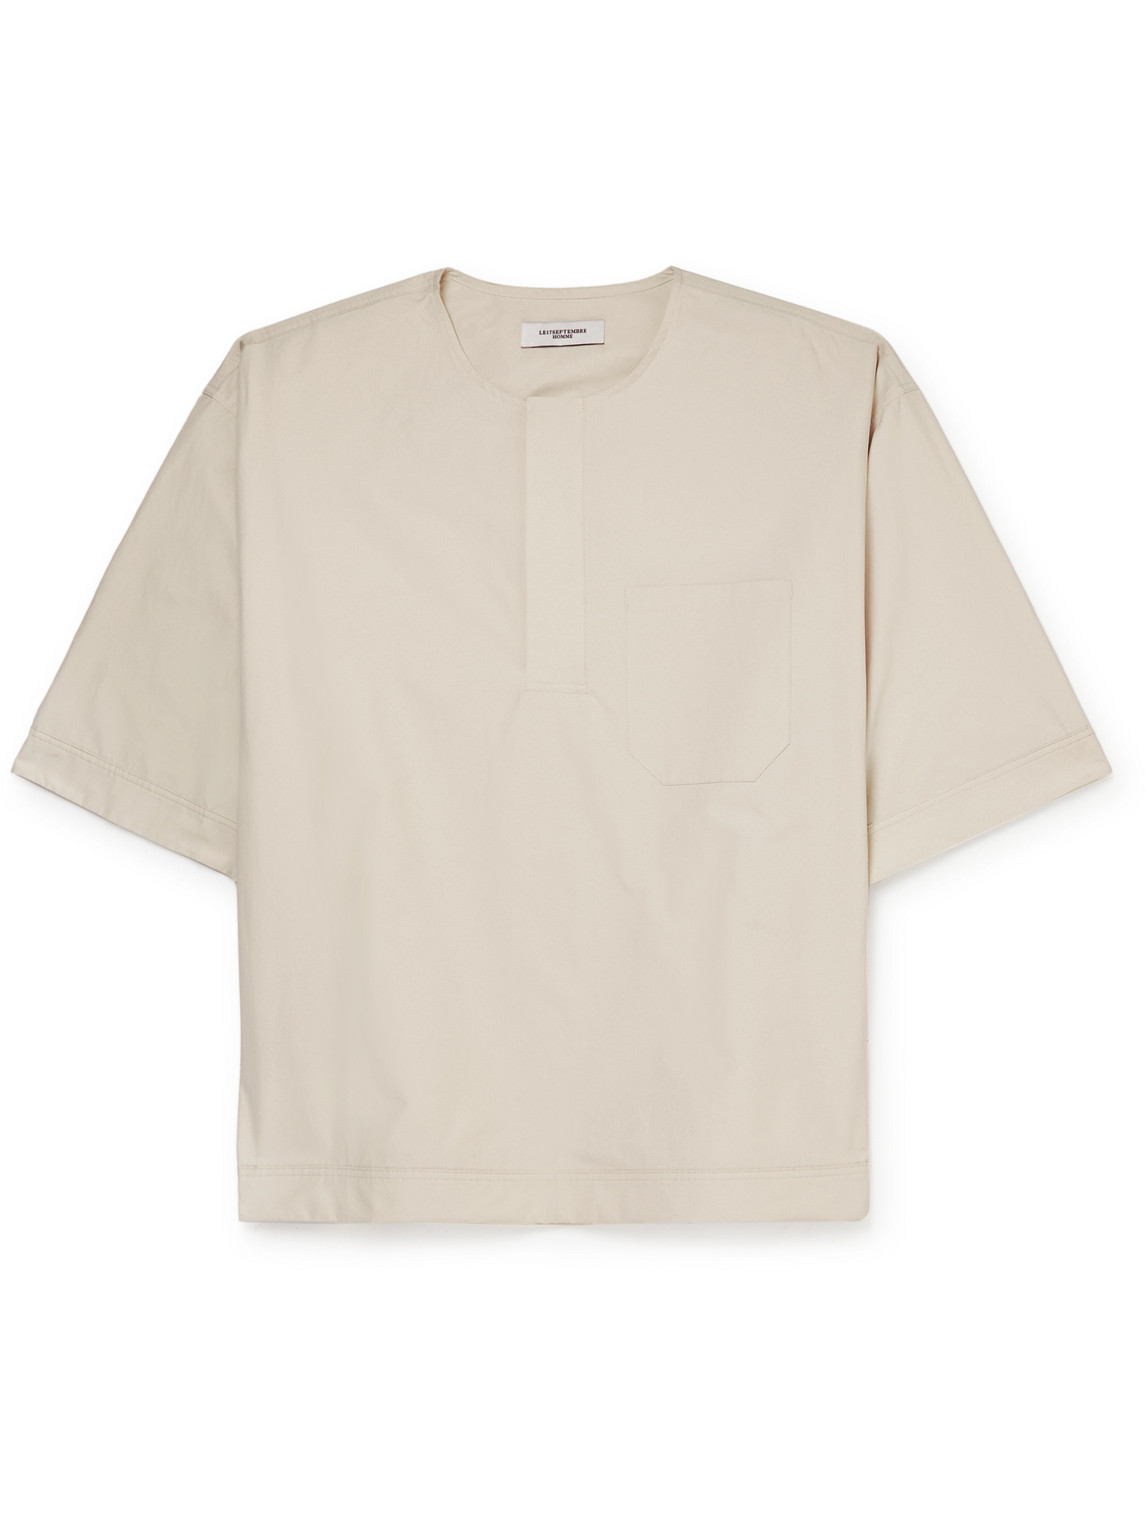 Le 17 Septembre Oversized Shell T-shirt In Neutrals